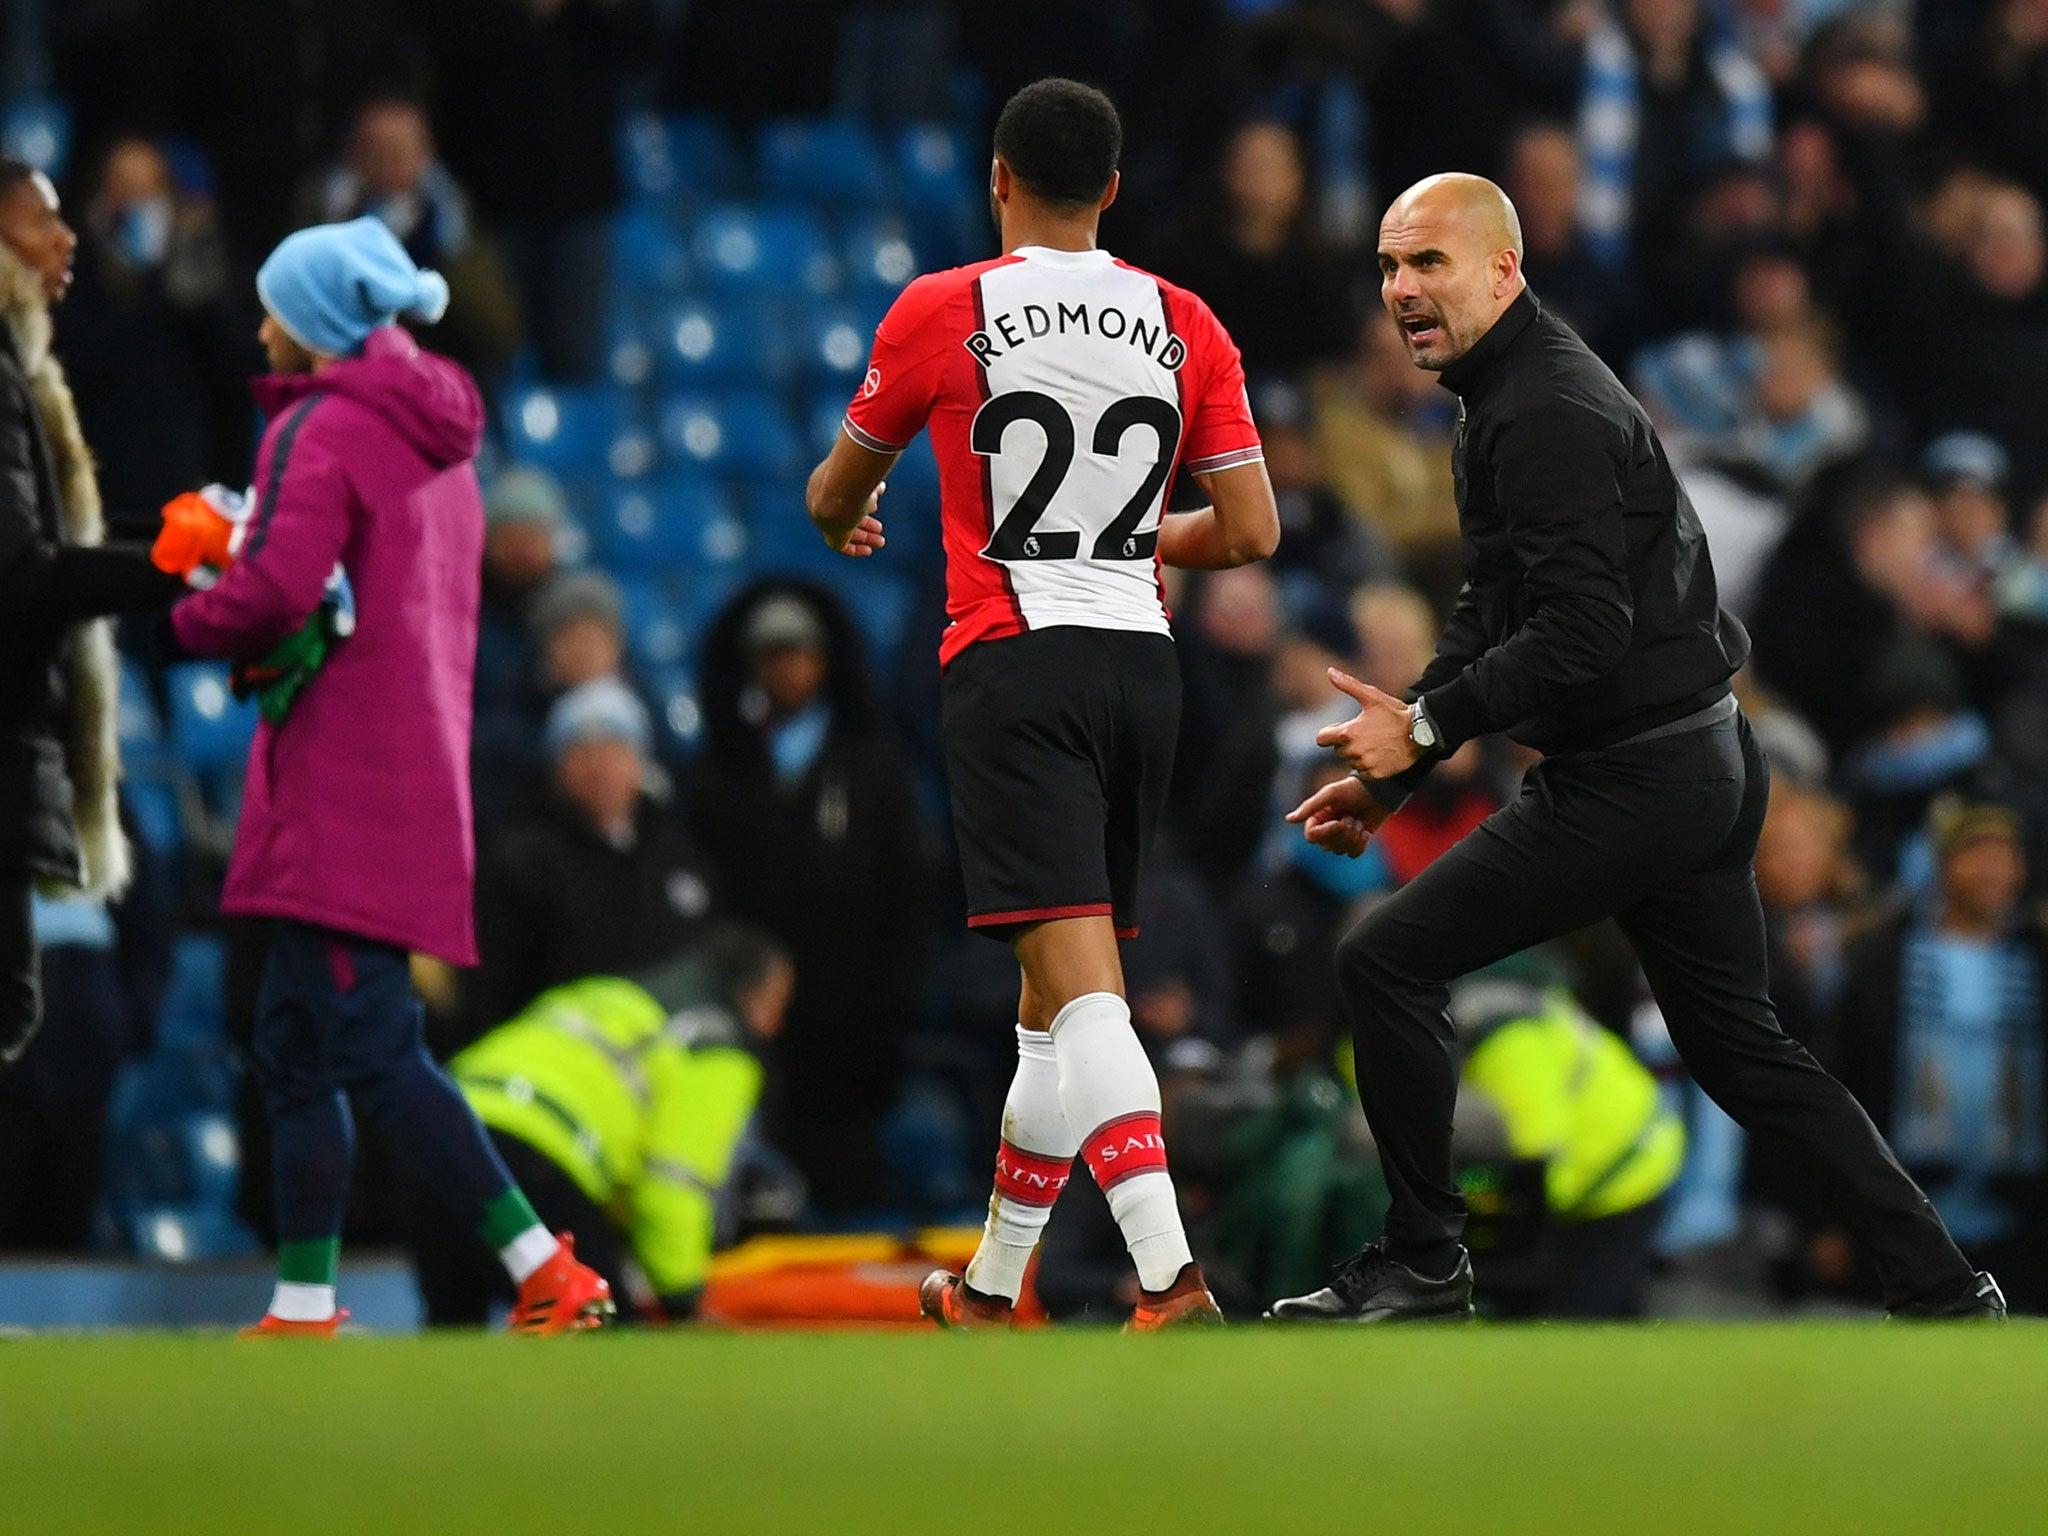 Pep Guardiola faces no action over Nathan Redmond confrontation but &apos;reminded of responsibilities&apos;